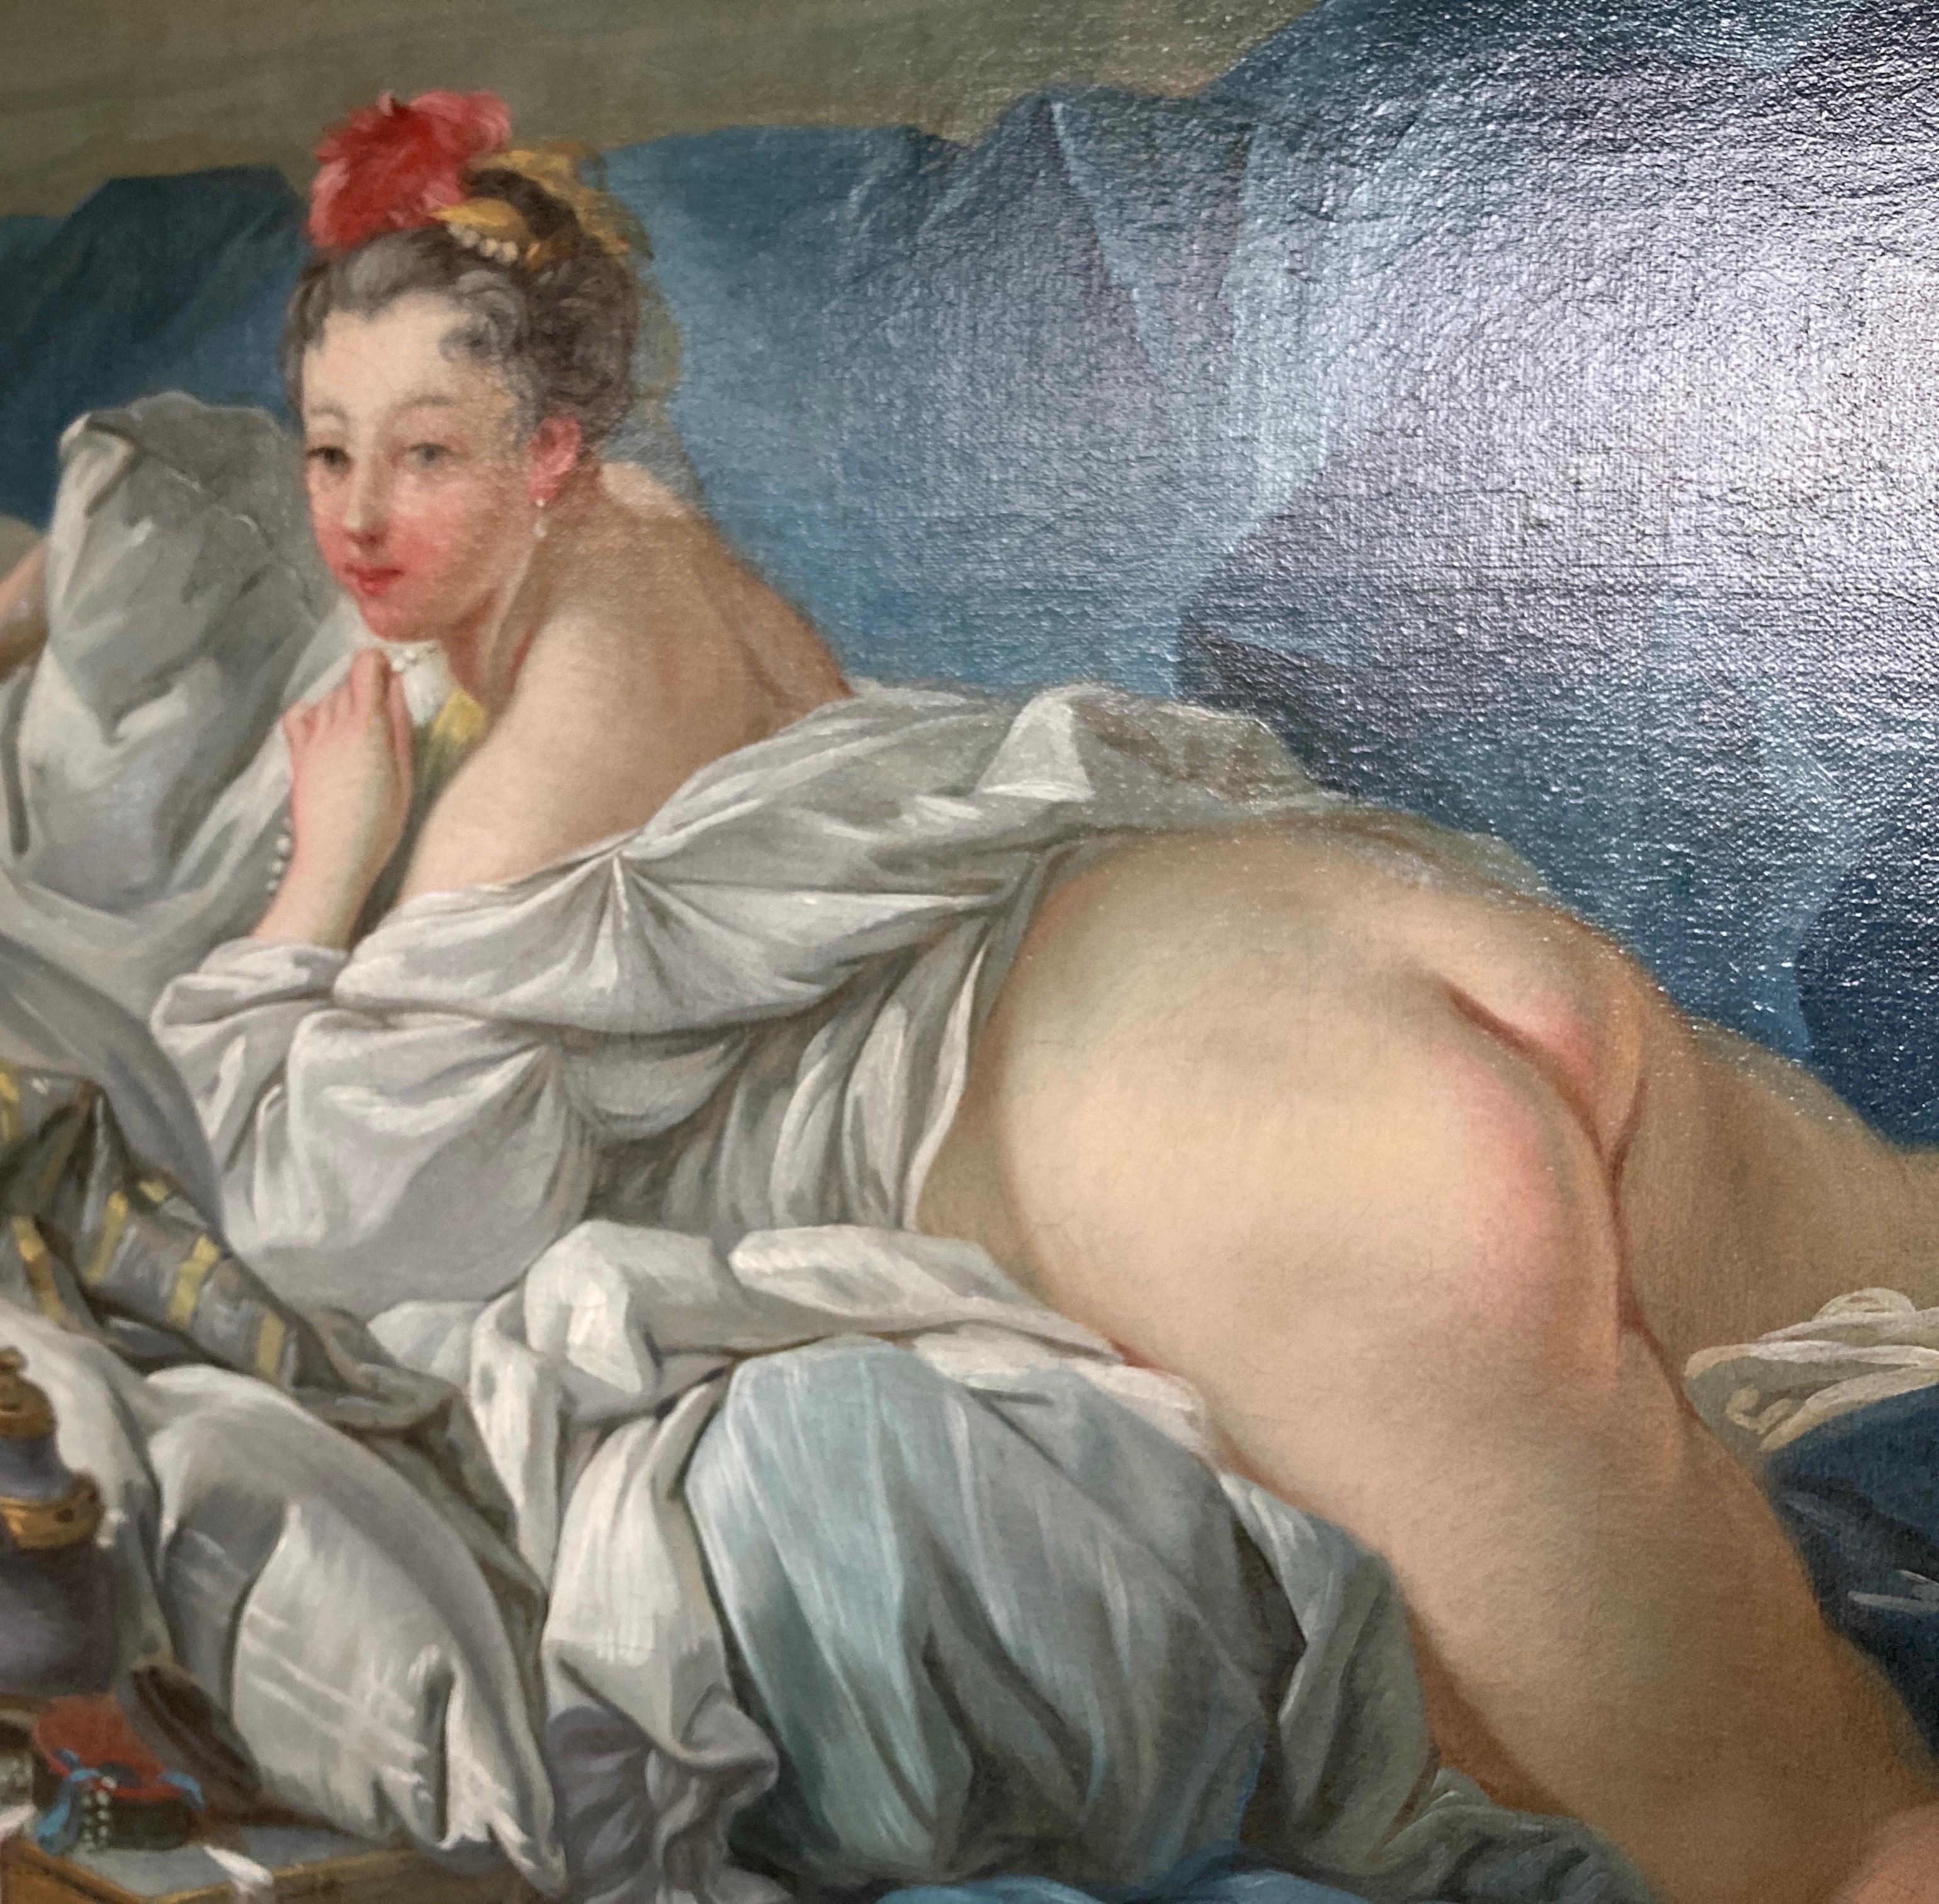 A voluptuous woman lies prone on a divan, bearing her backside and turning her head flirtatiously to the viewer, though averting her eyes slightly, as if to maintain a coy demeanor. Surrounded by lush fabrics of deep blues, the creamy tones of her